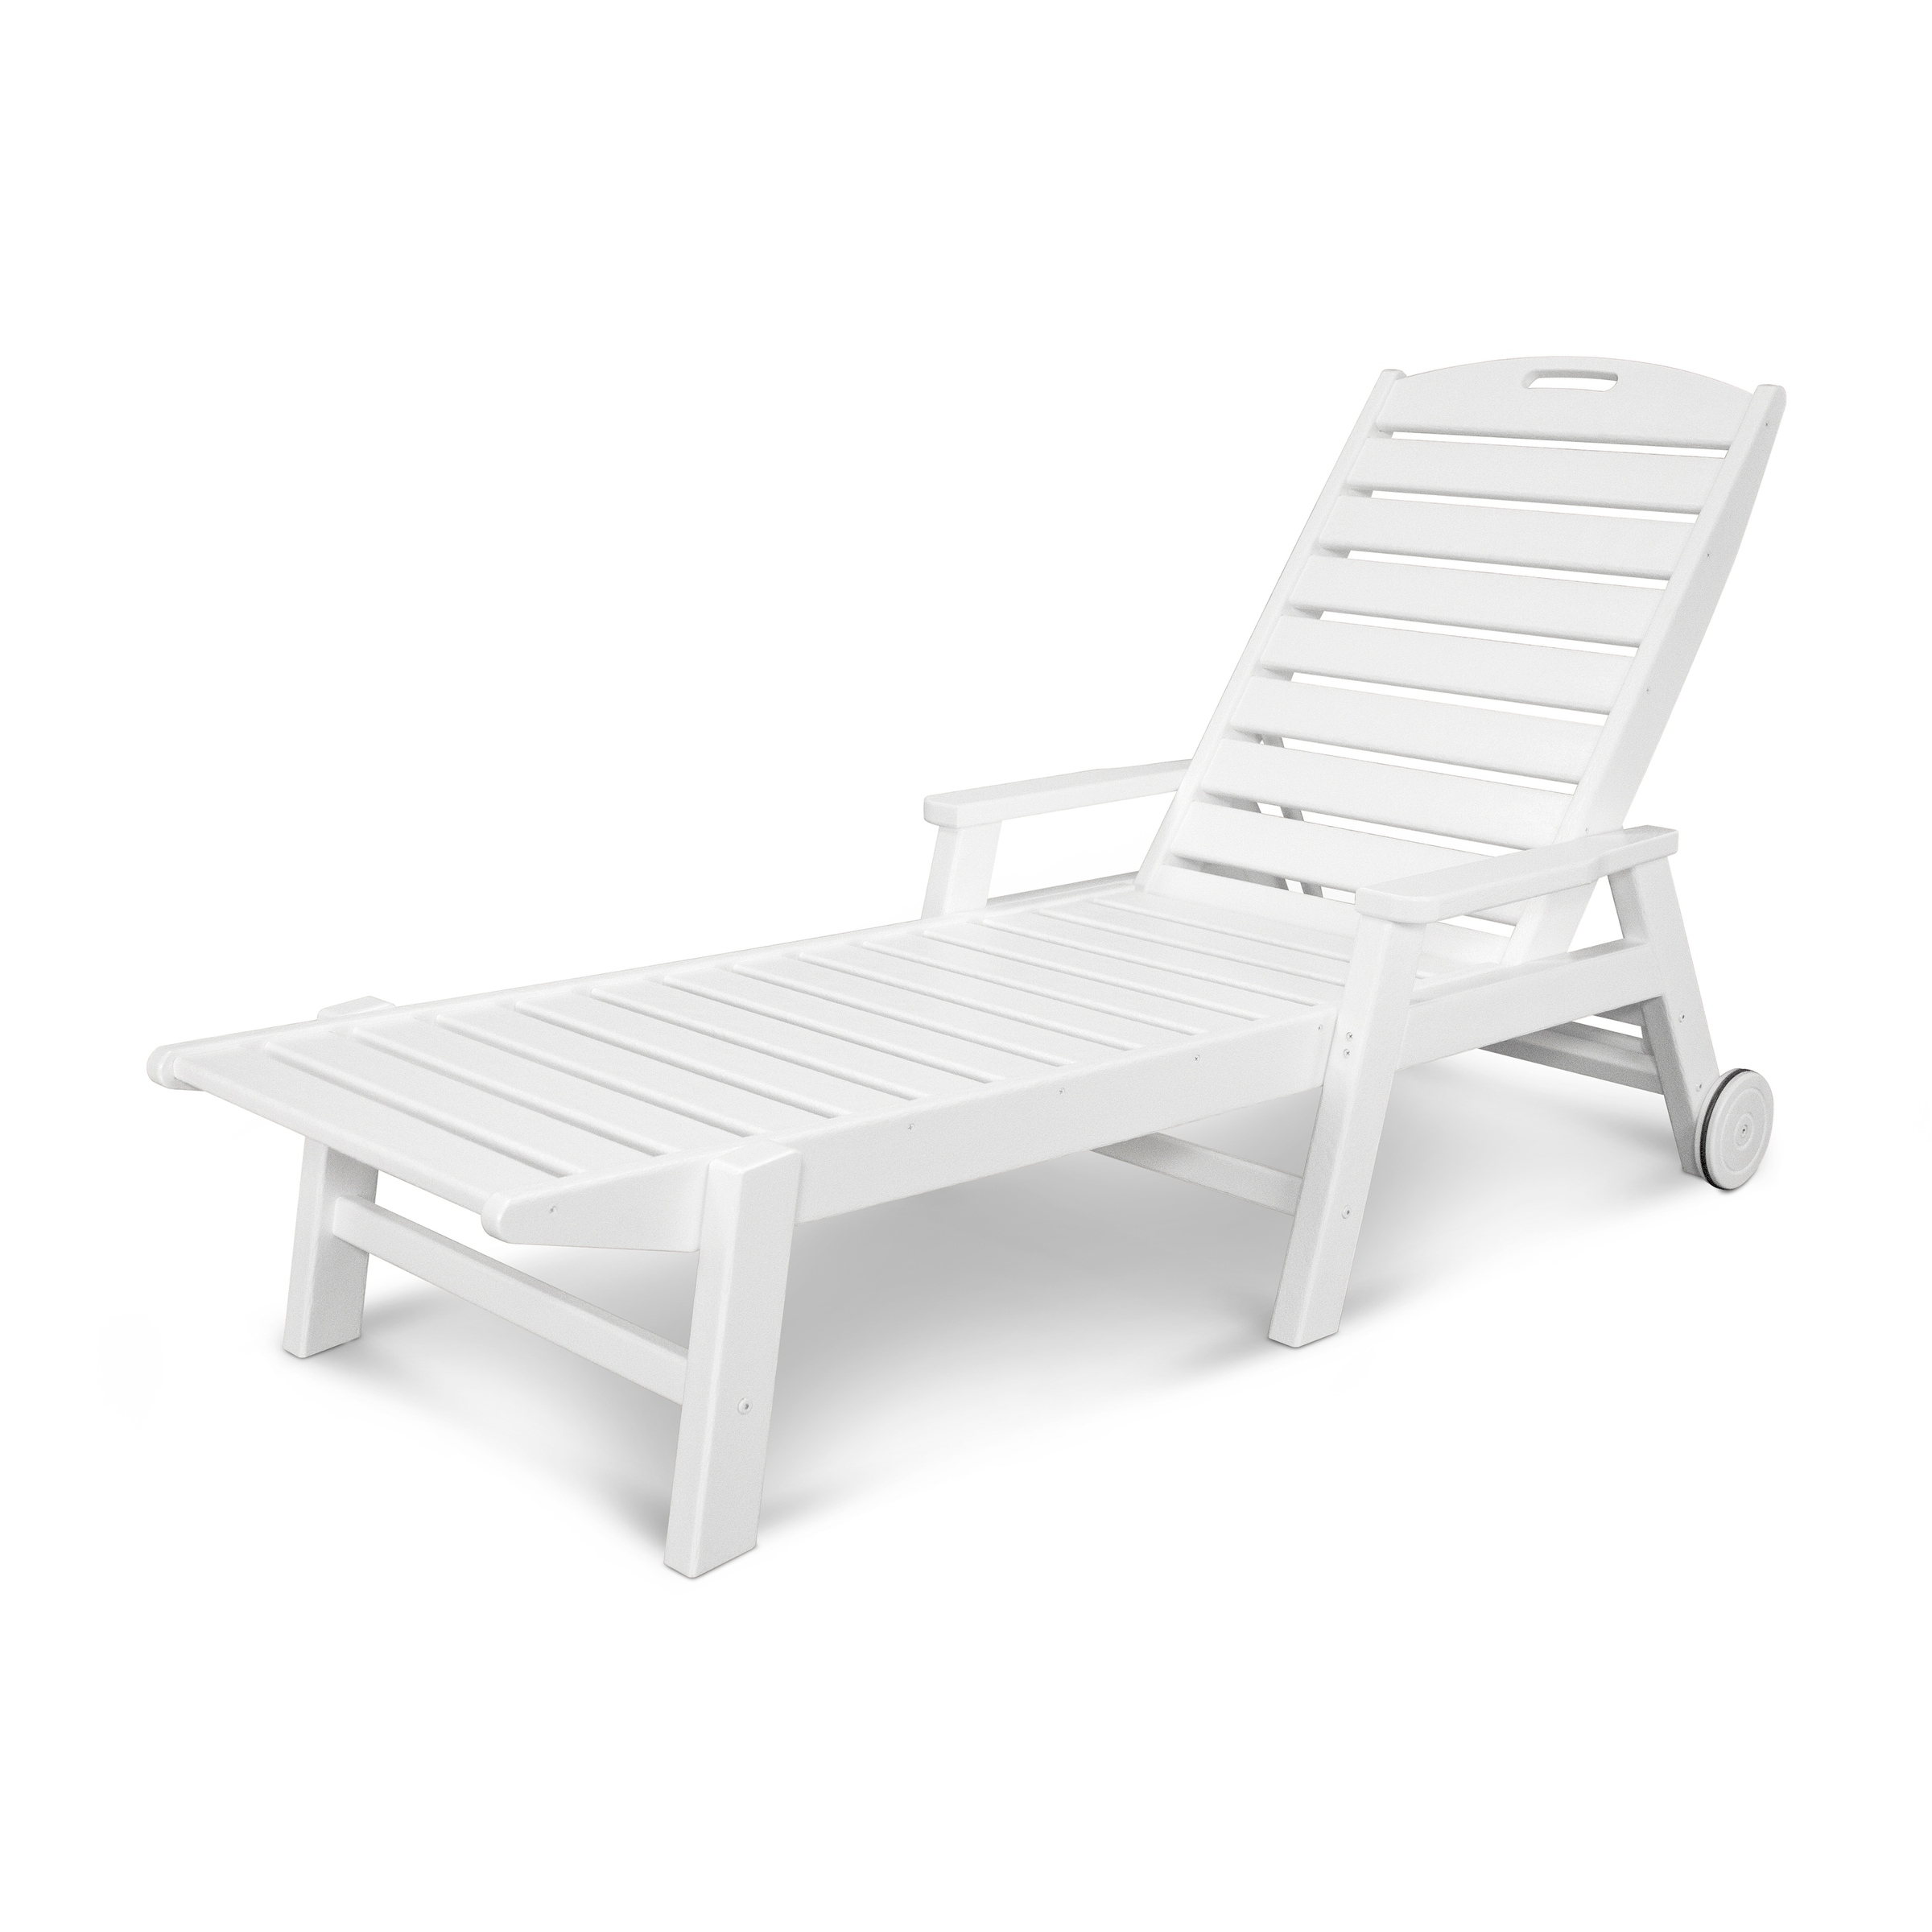 Polywood Nautical Chaise Lounge With Arms And Wheels